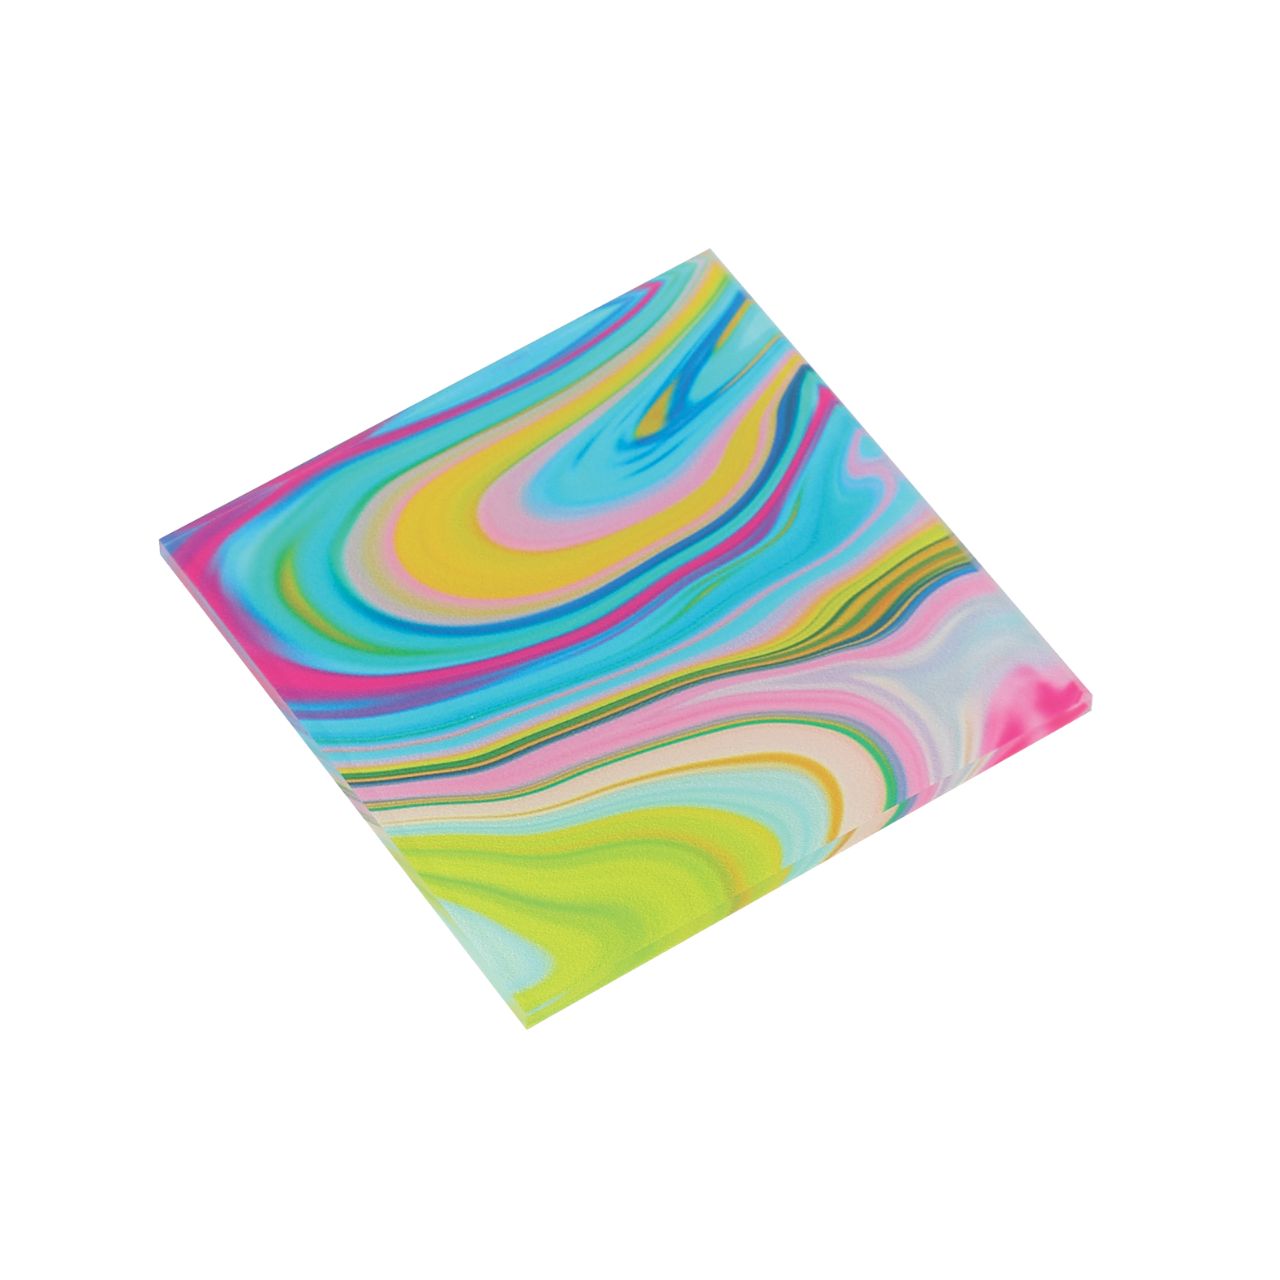 Jessi Raulet Garden & Groove Coaster Set of 4 by Etta Vee  Artist, designer and art influencer, Jessi Raulet, is known for her colourful and bold designs. Keep the table clean and cool with these absolutely electric hued acrylic coasters. These come in their on gift box making a great gift for a first home or even a self purchase.